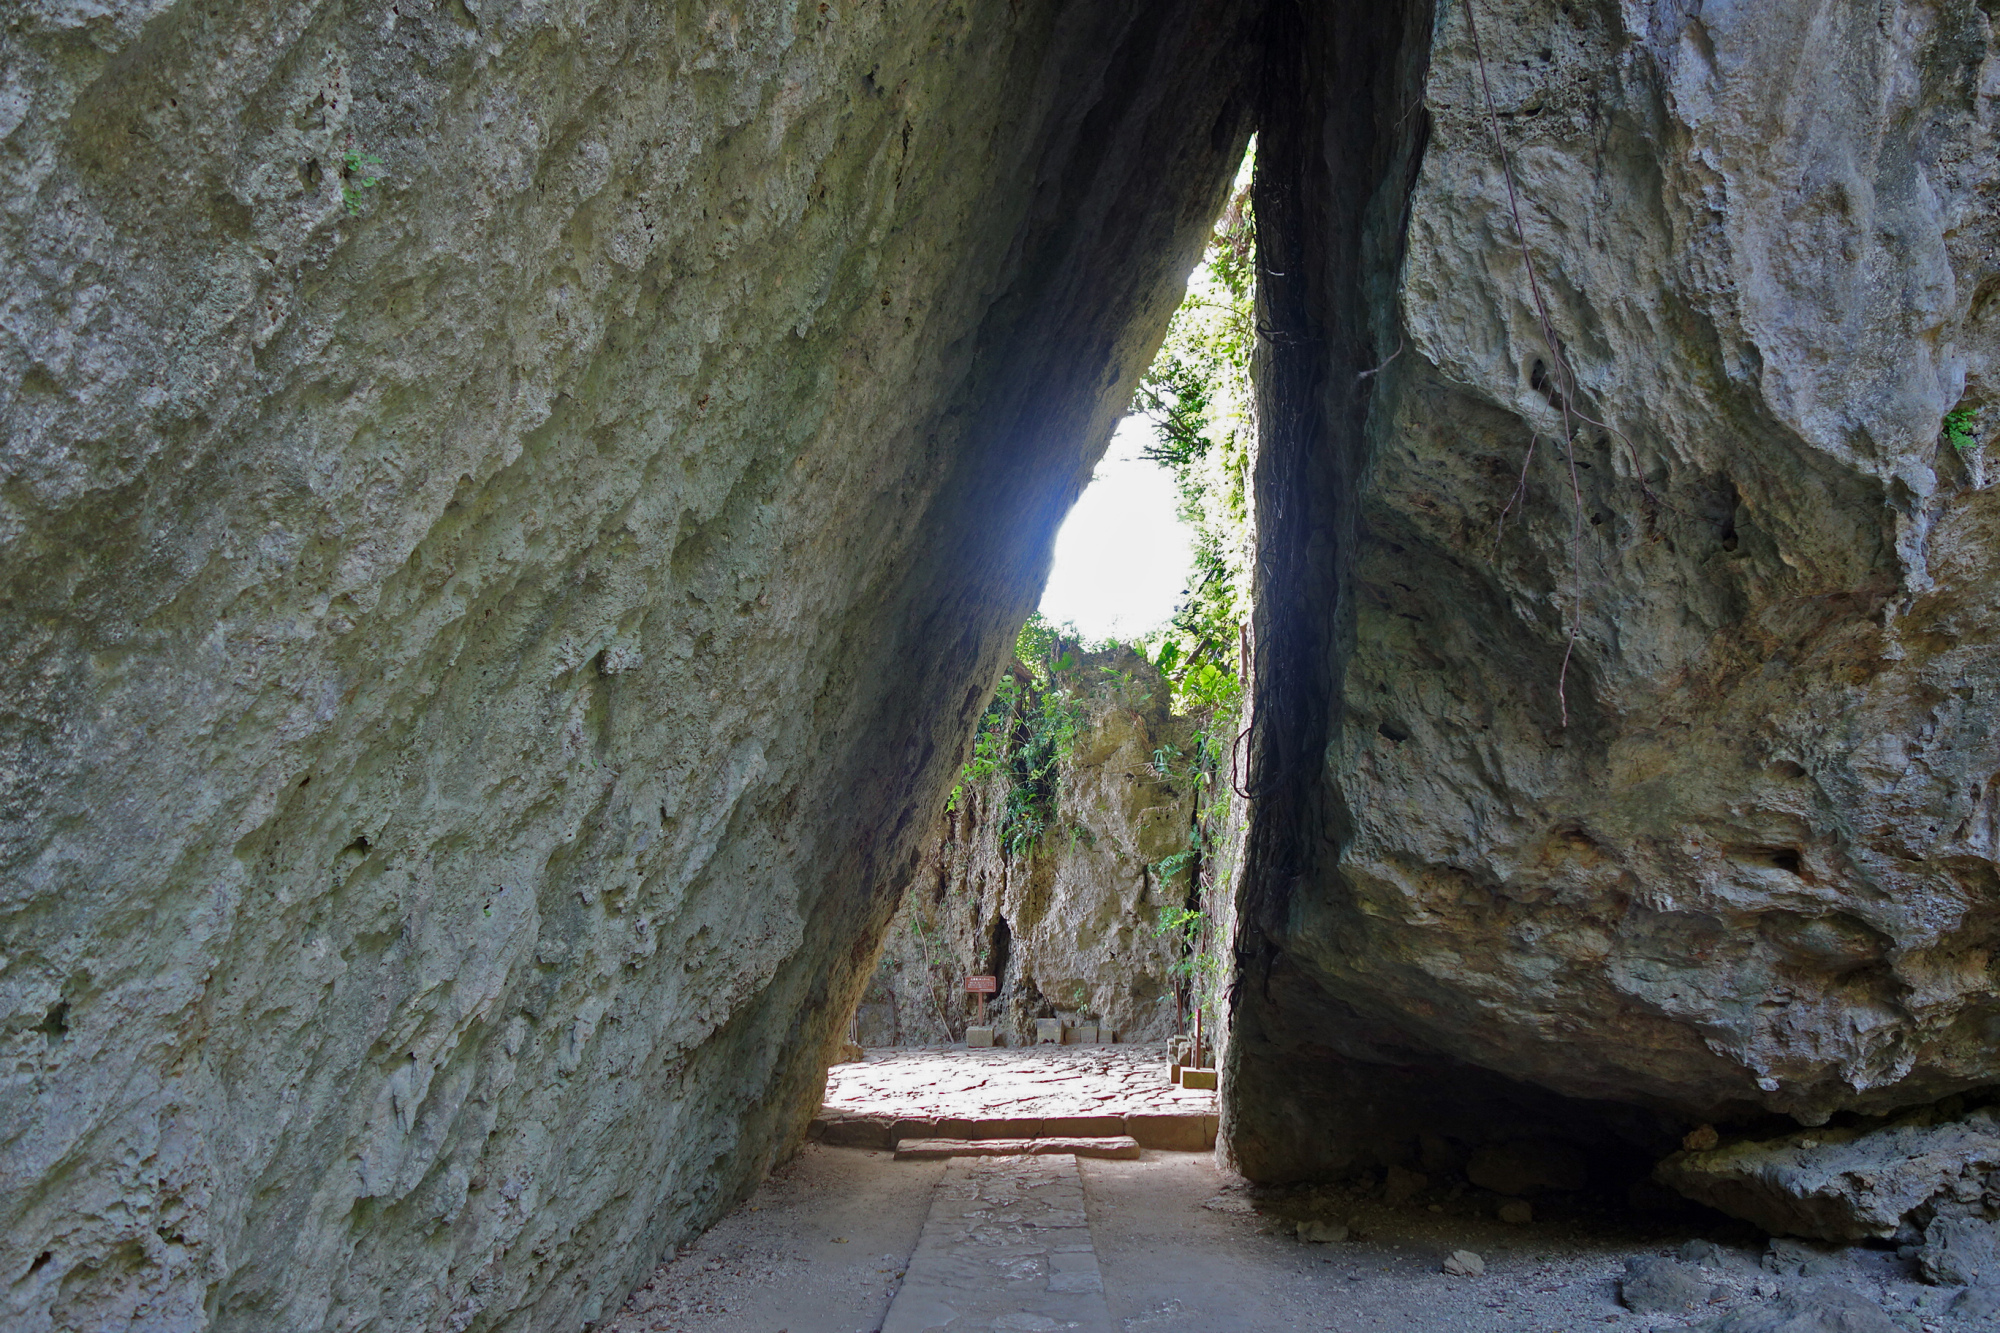 A pilgrimage for kings: The most iconic of Sefa Utaki's ibi (sanctuaries) is Sangui, a triangular tunnel formed between two rock faces. | ALEX MARTIN